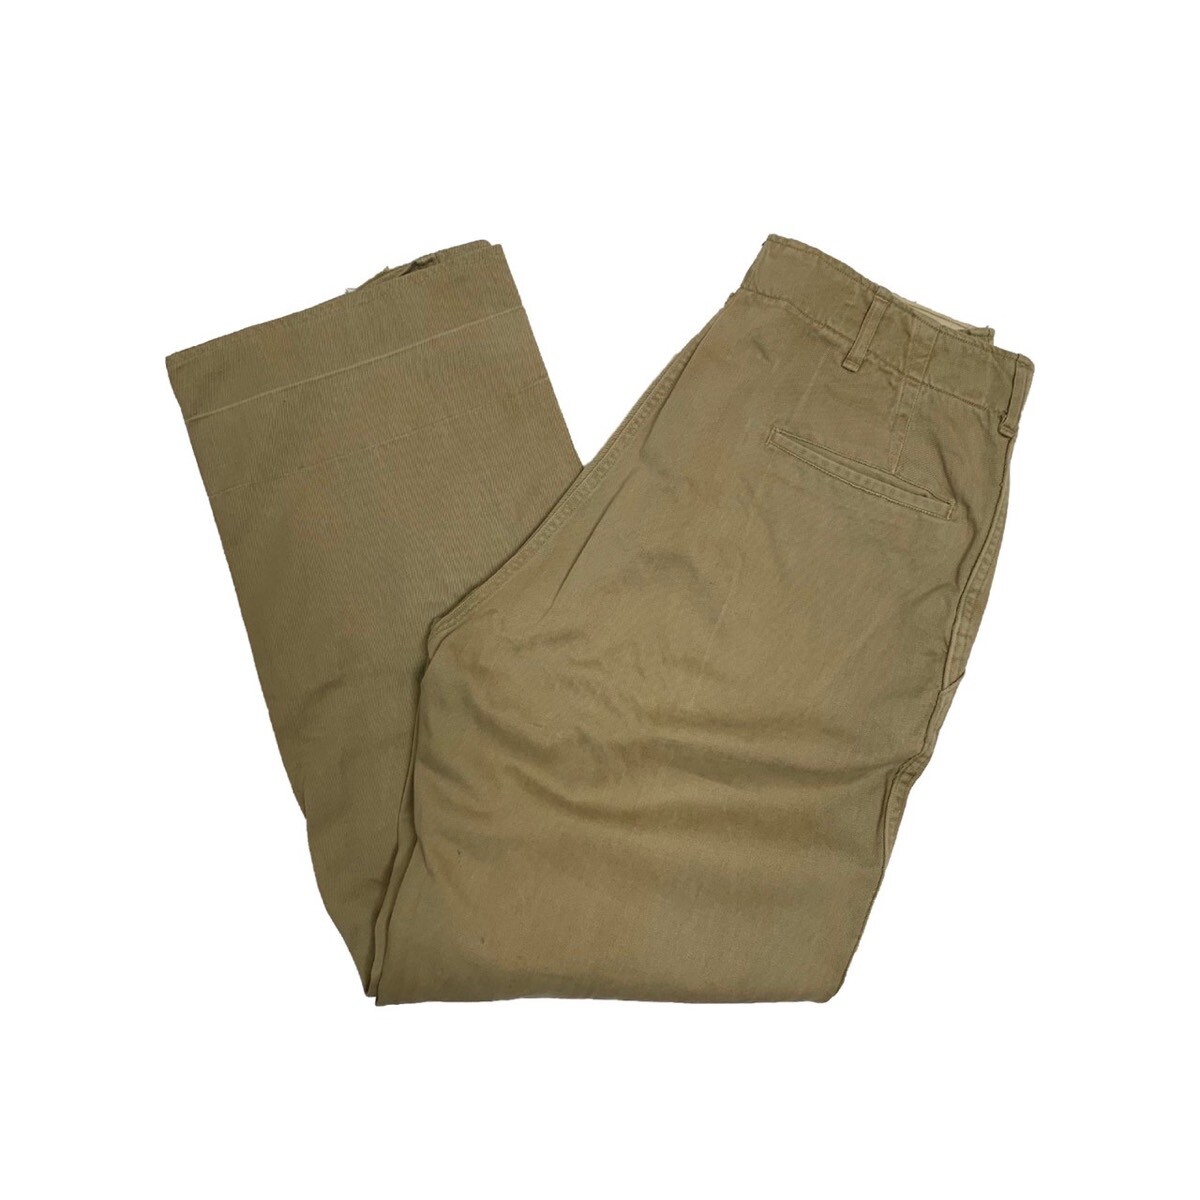 40's U.S.ARMY CHINO PANTS - NOW OR NEVER